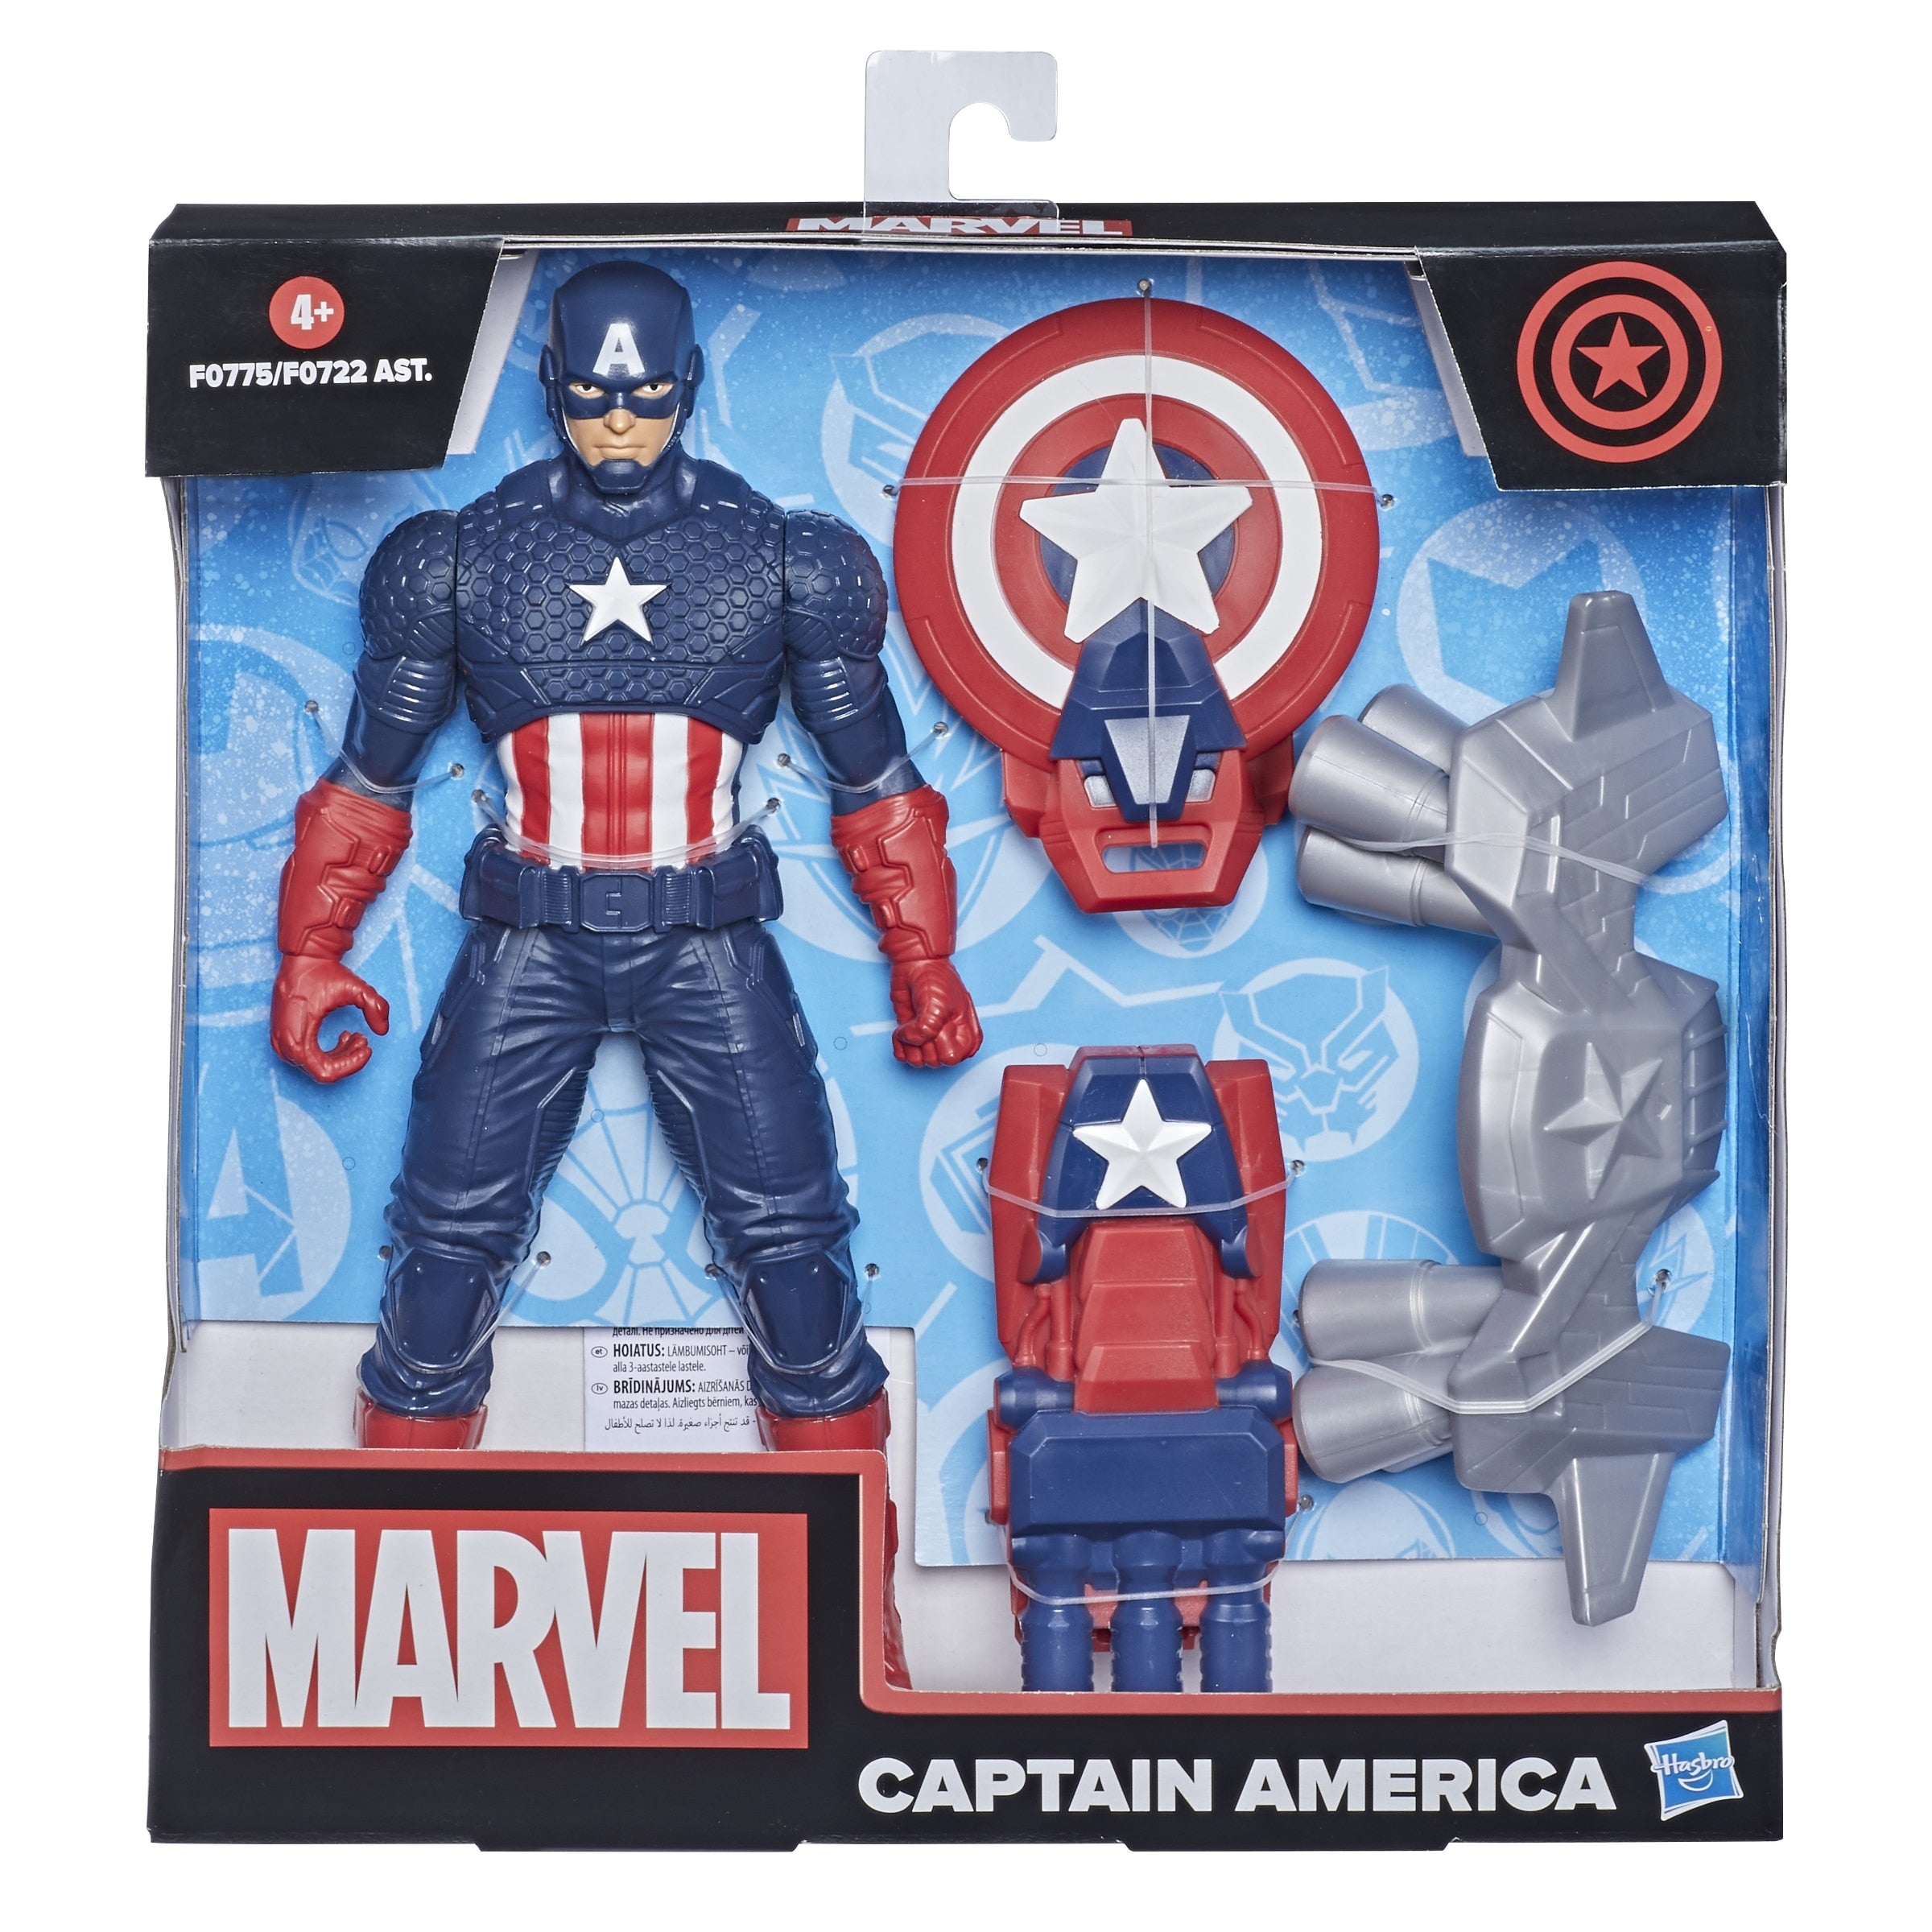 Marvel Action Figures – Captain America with Gear